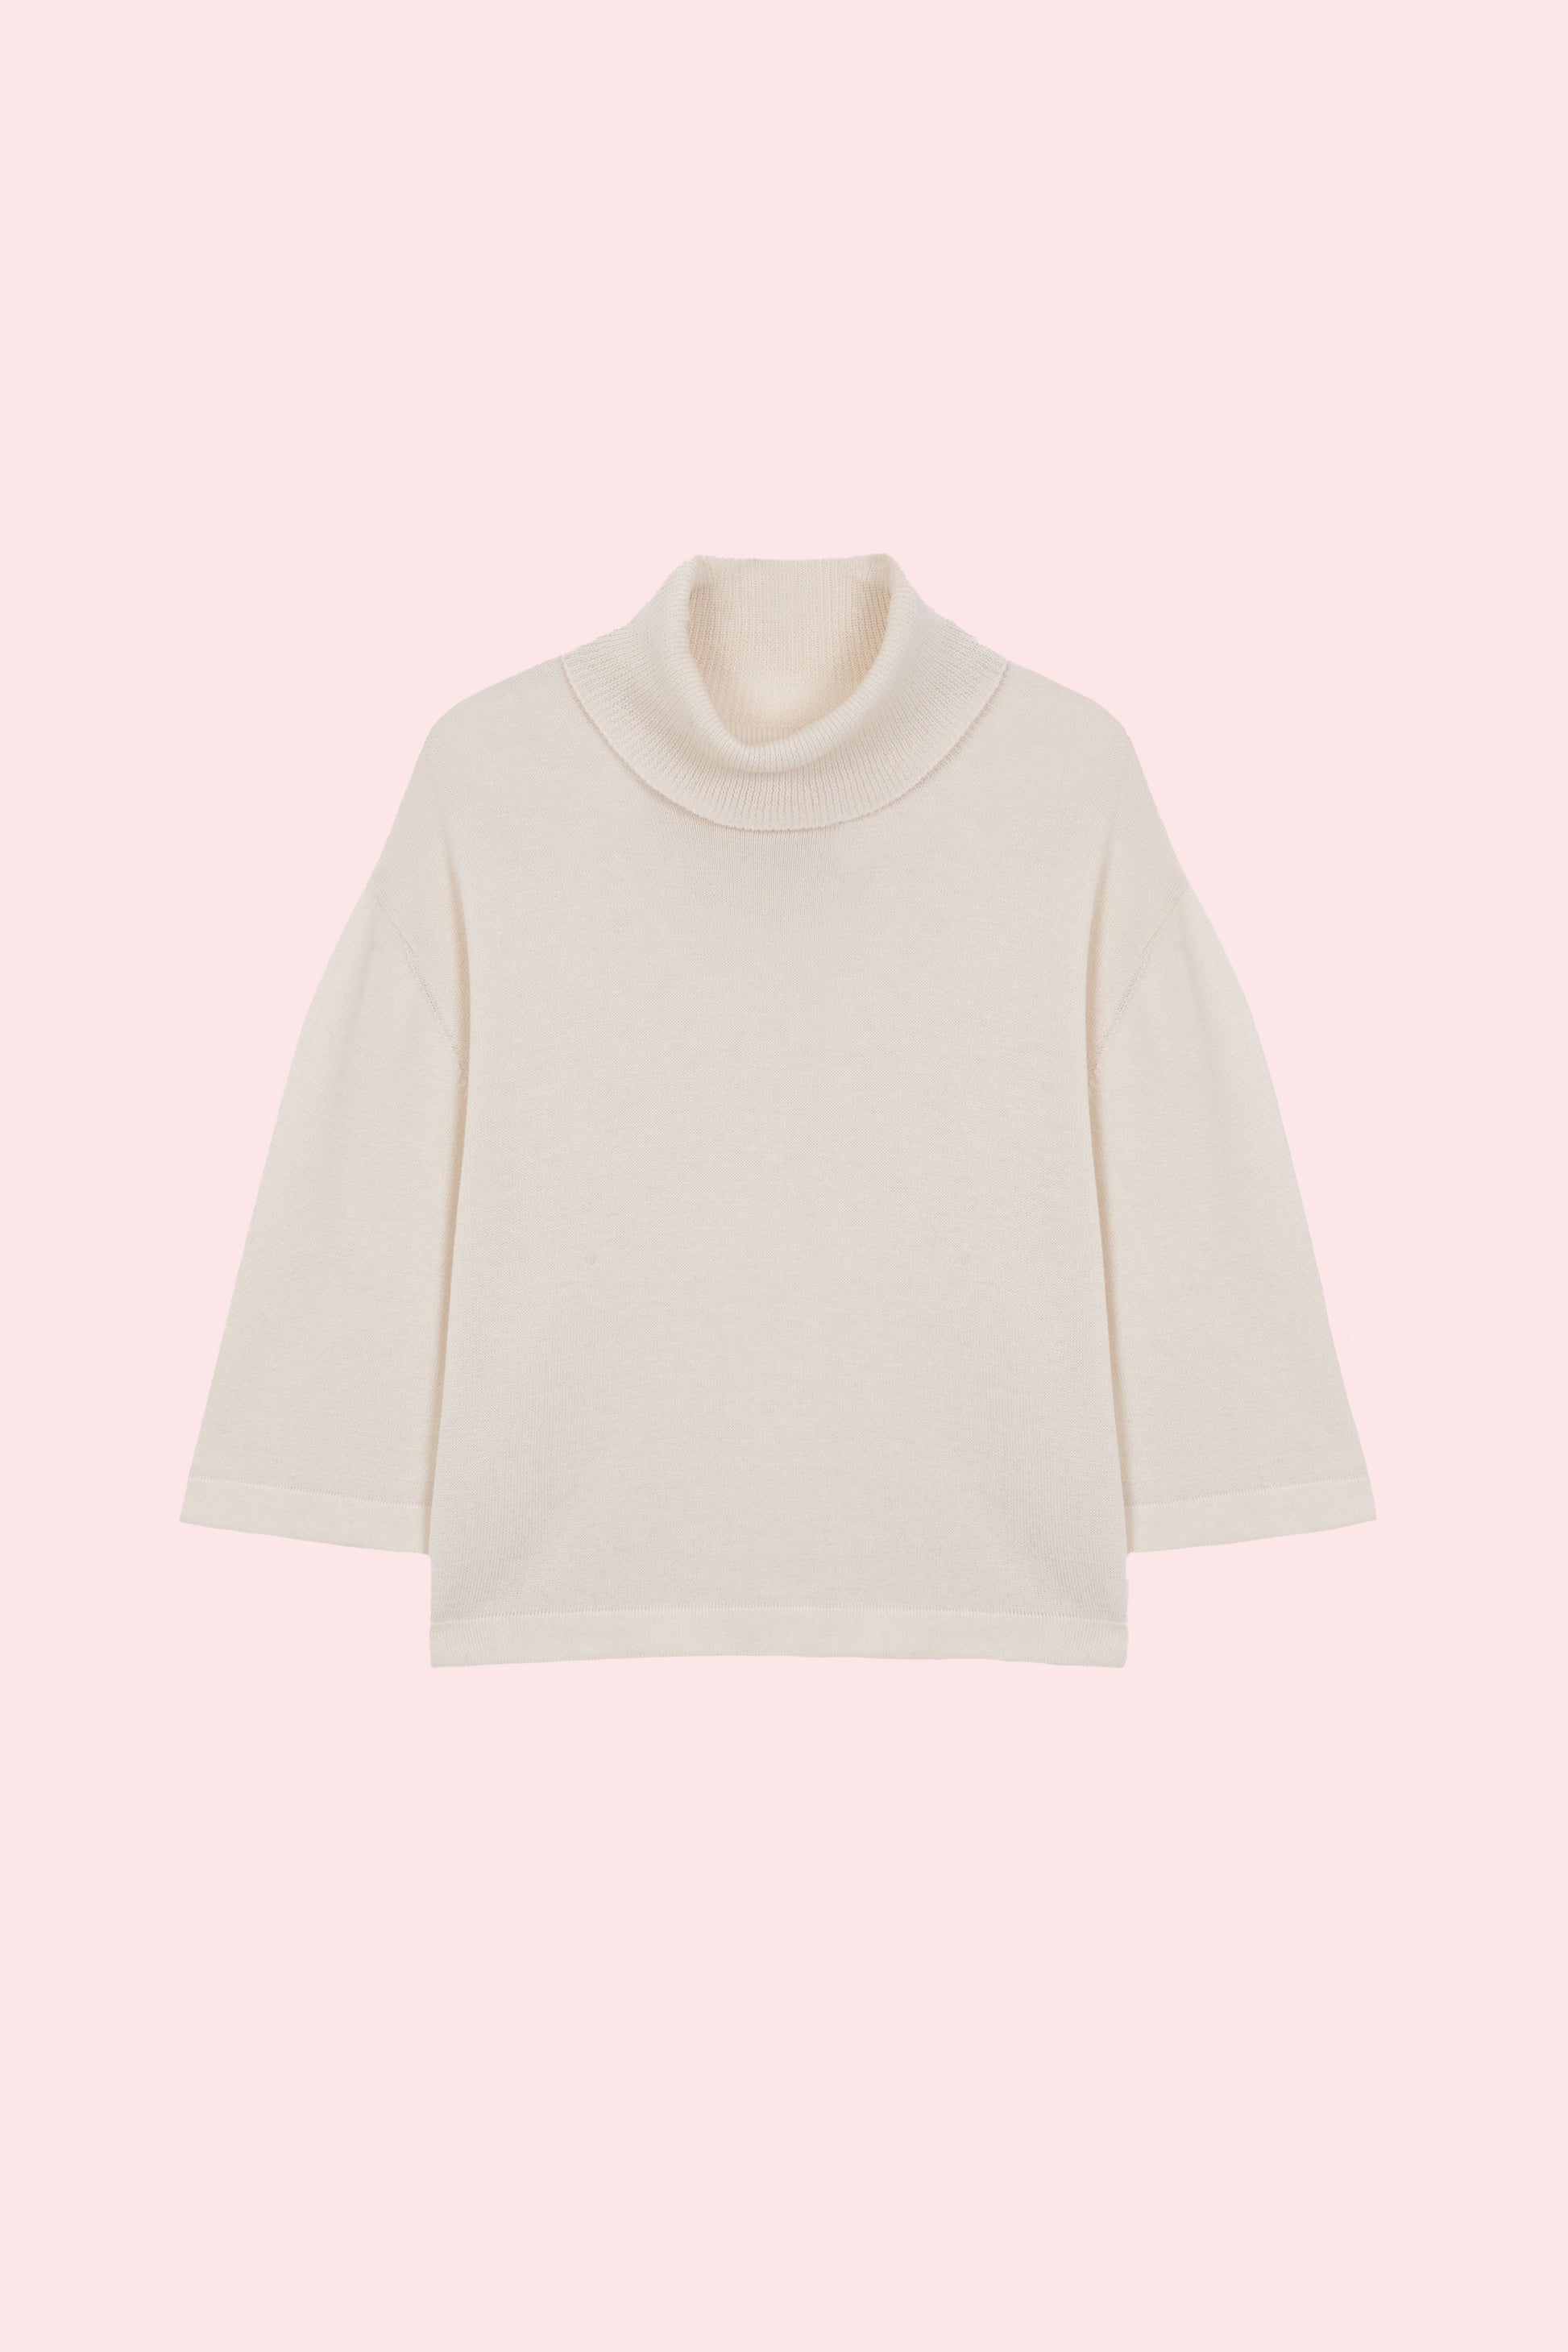 Cordera cotton & cashmere turtleneck sweater natural product front